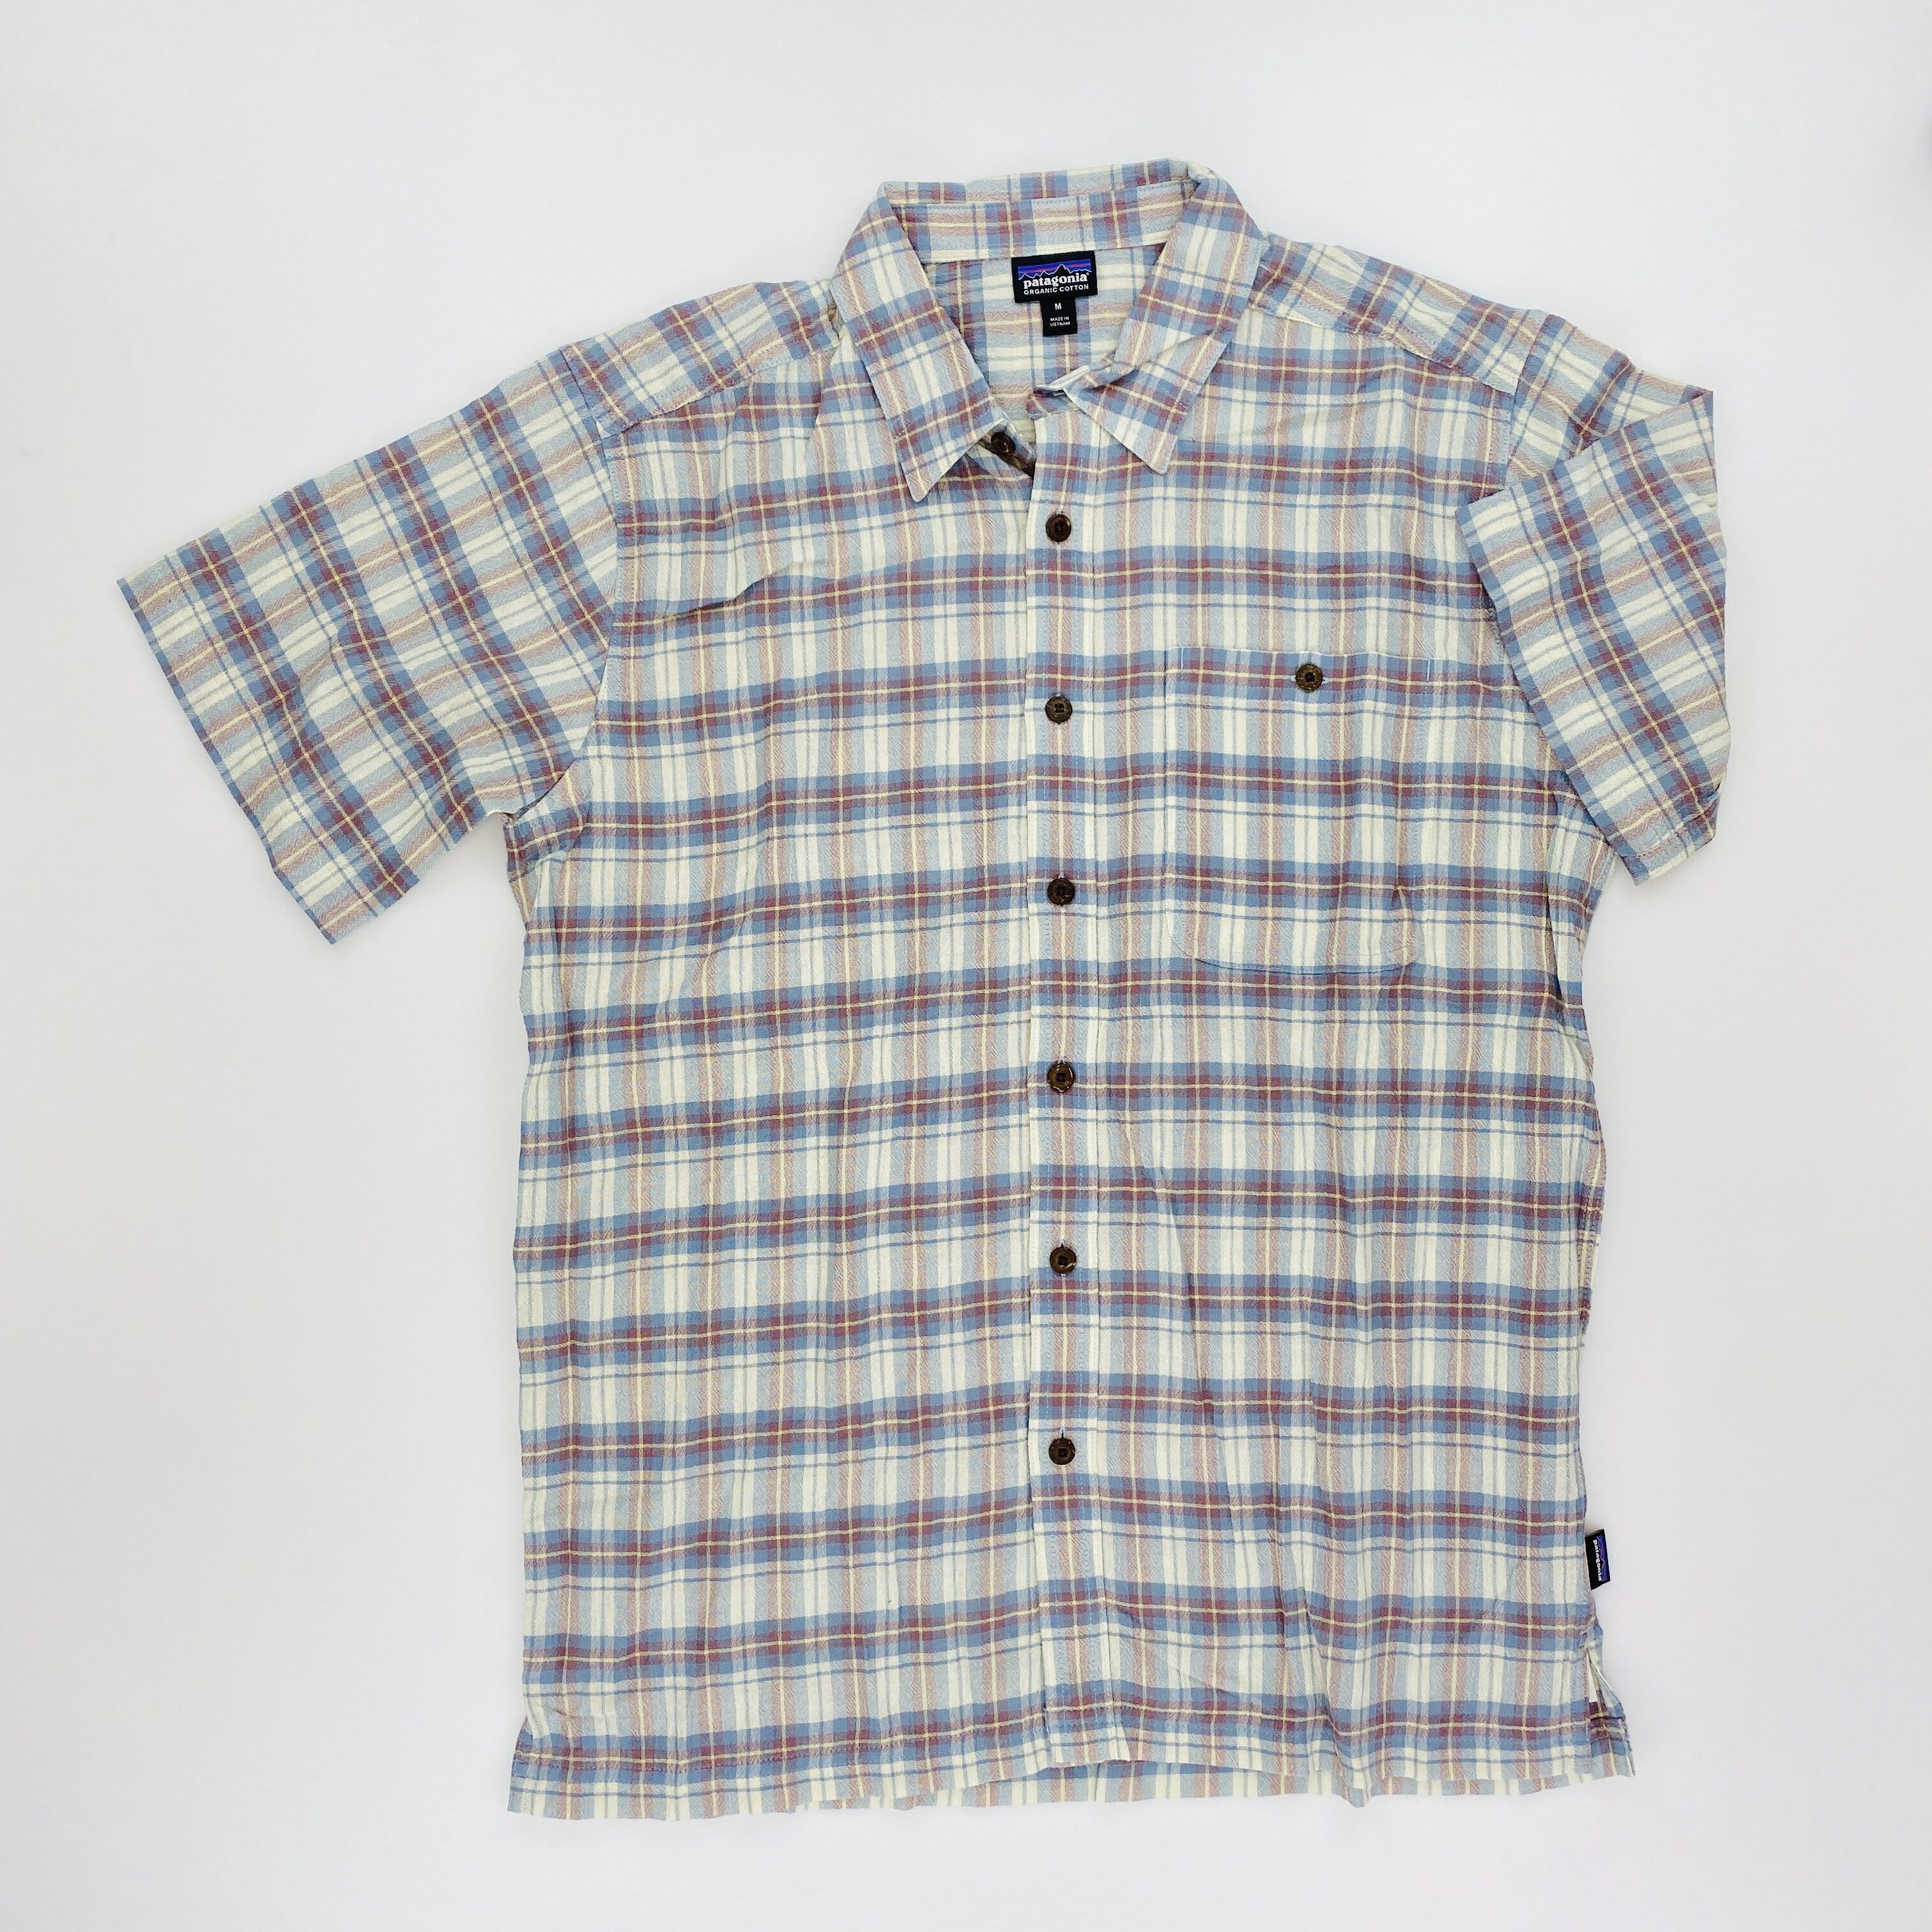 Patagonia M's A/C Shirt - Seconde main Chemise homme - Violet - M | Hardloop